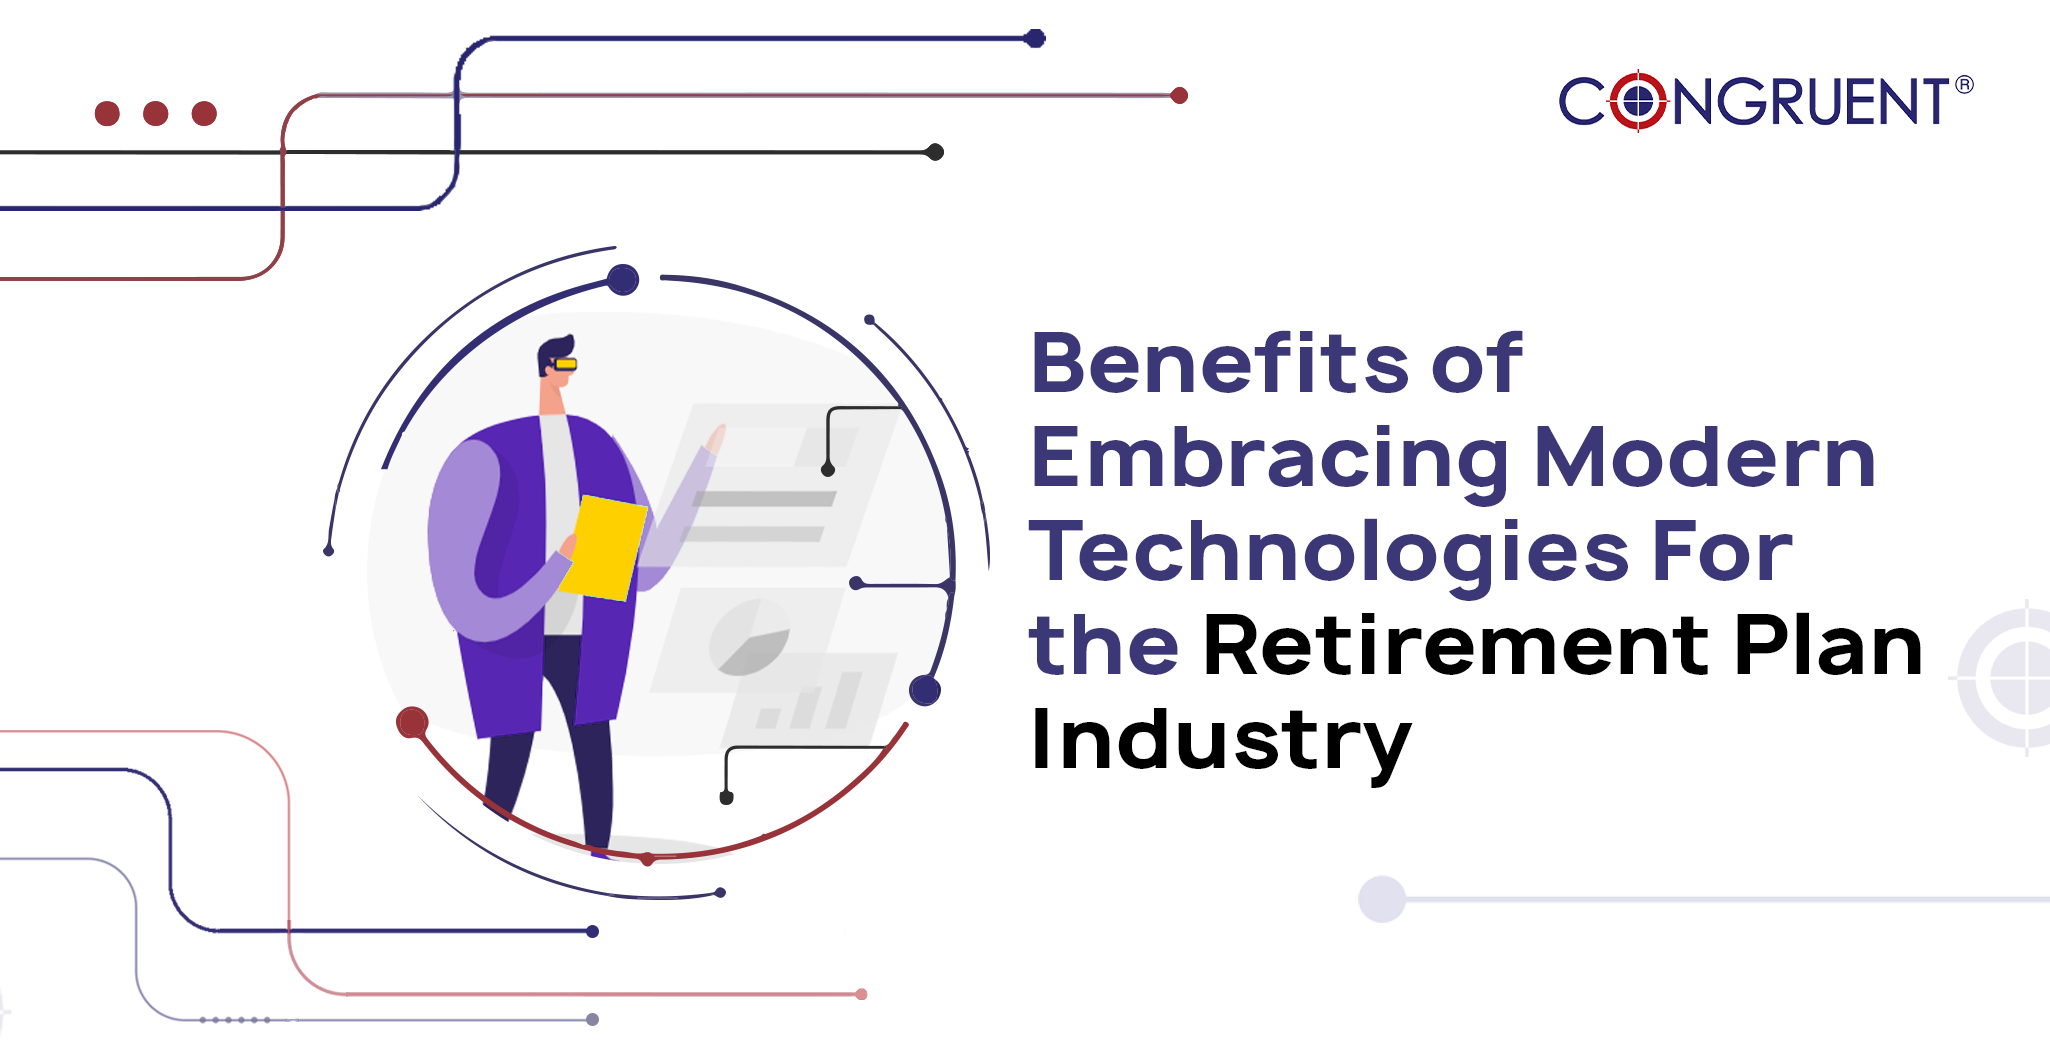 Benefits of Embracing Modern Technologies For the Retirement Plan Industry